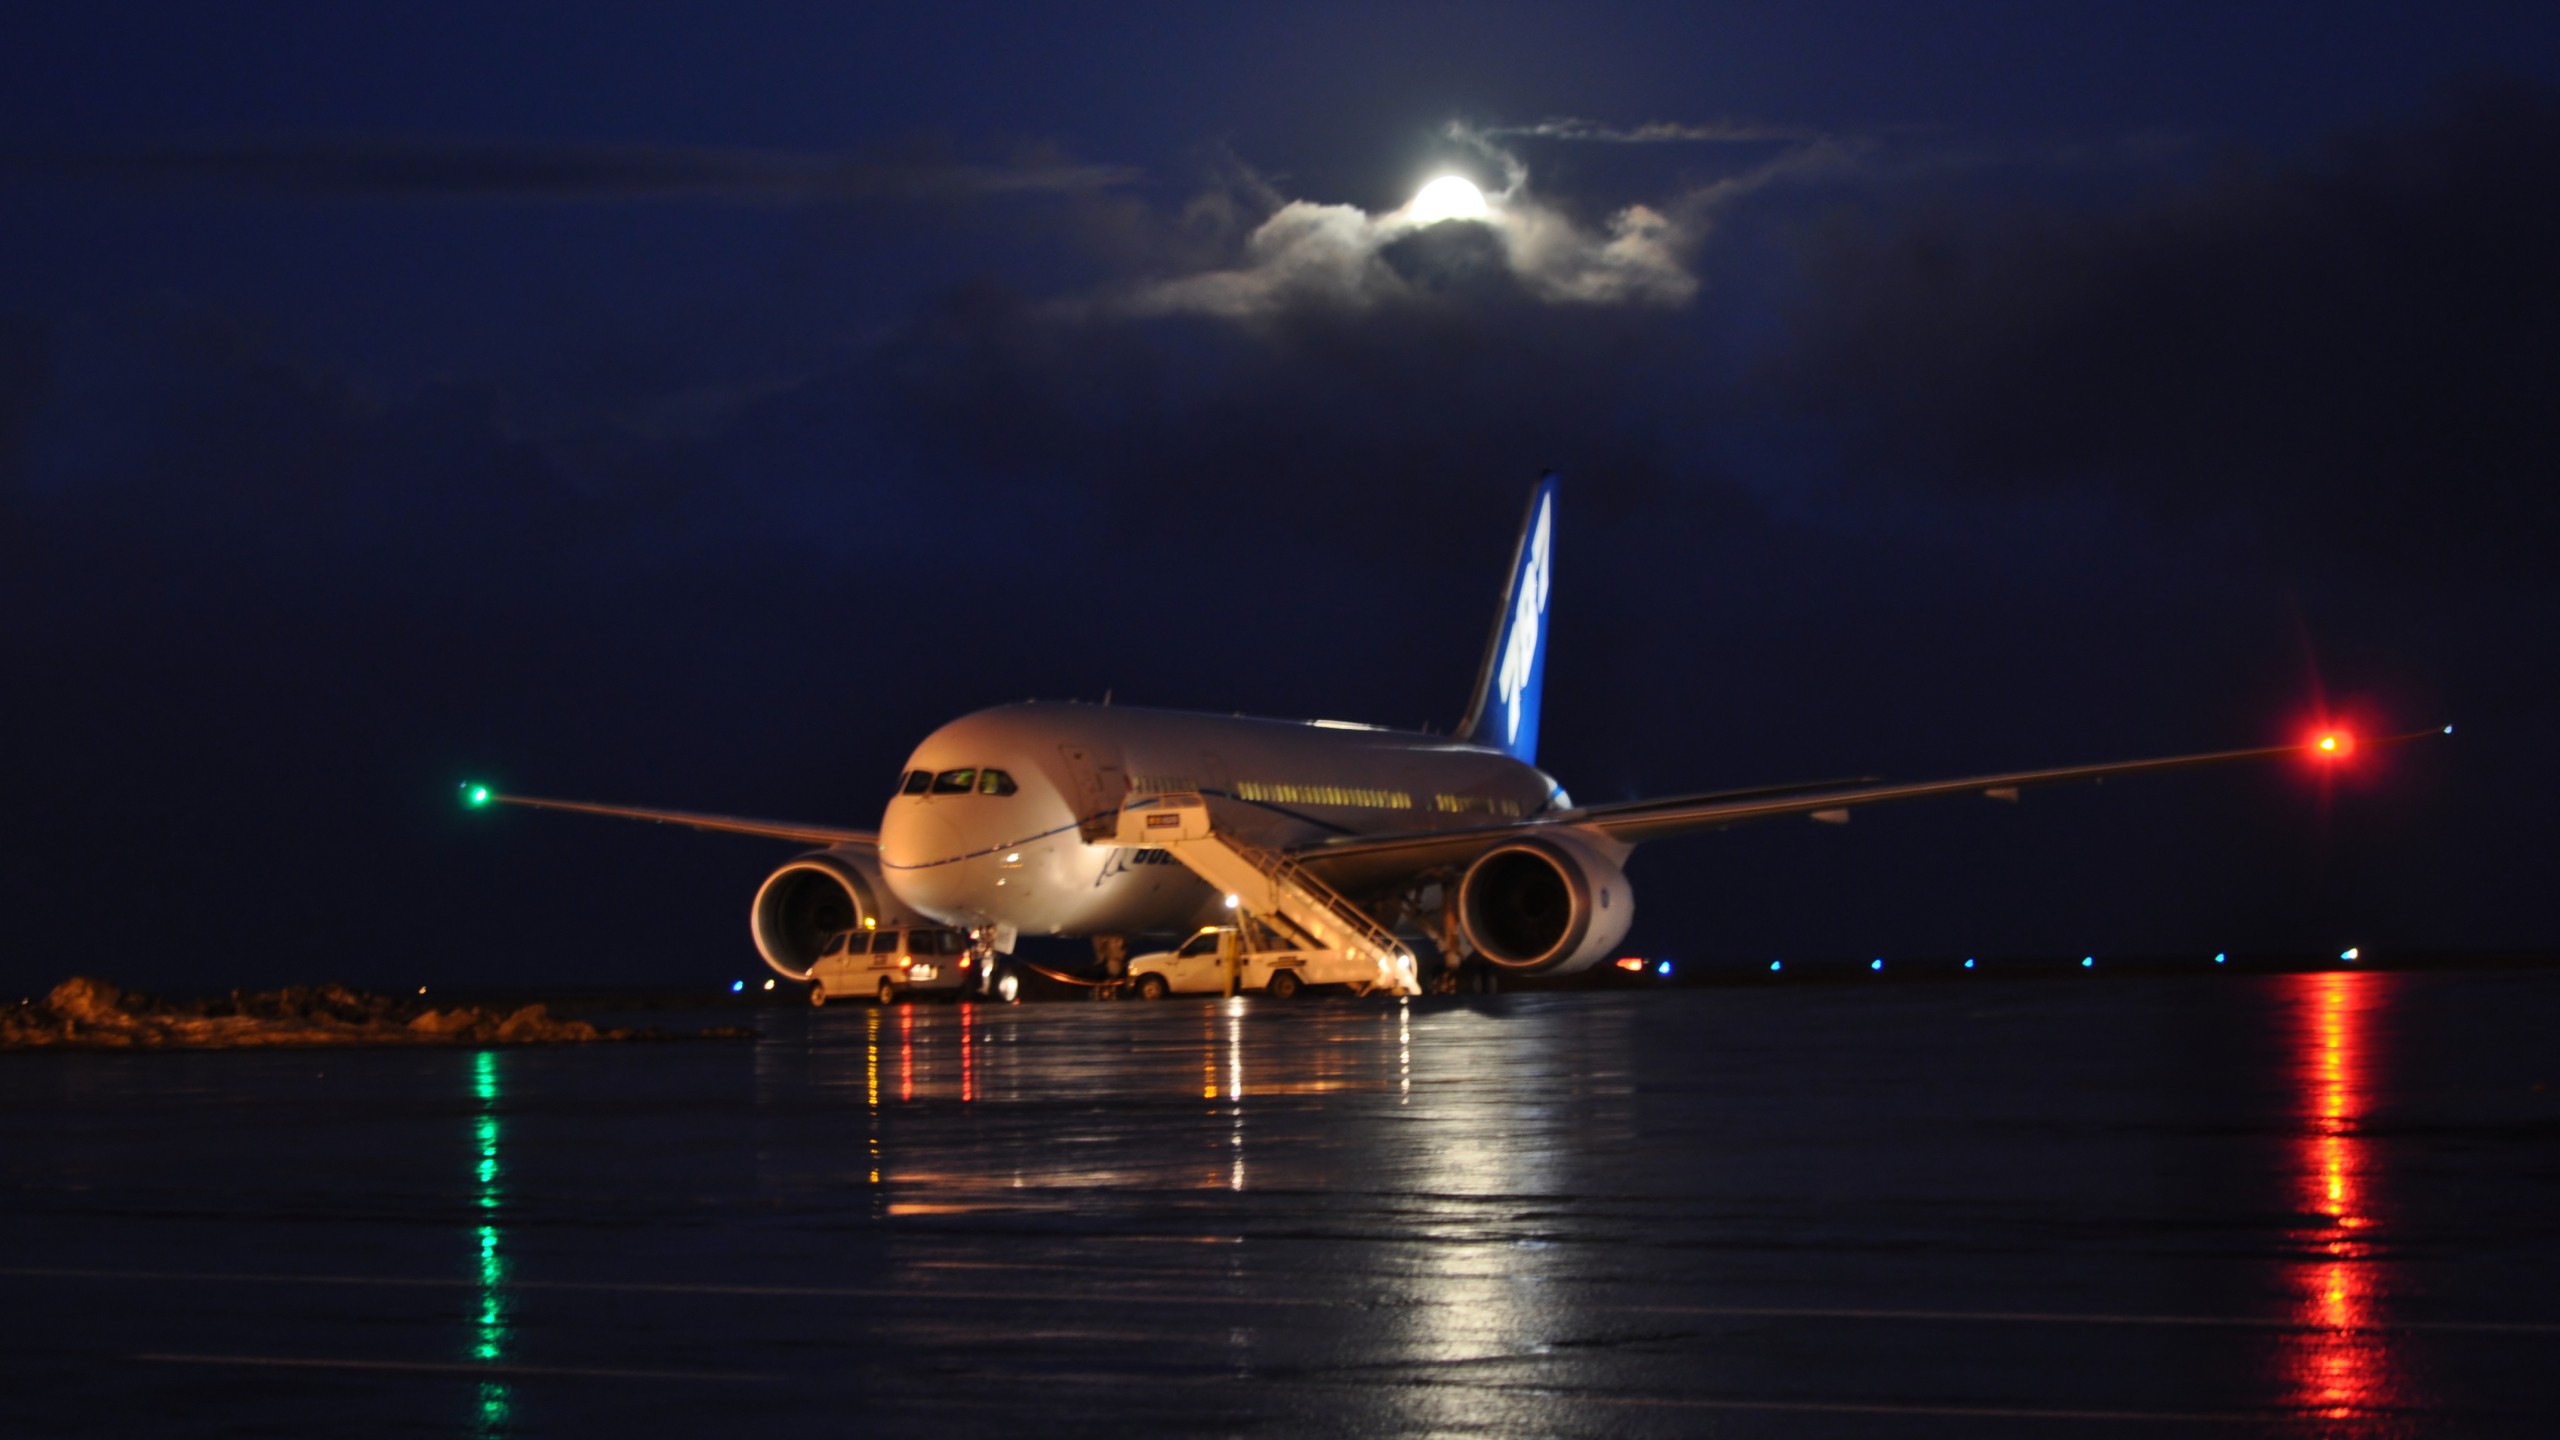 General 2560x1440 airplane night lights aircraft passenger aircraft vehicle Boeing Boeing 787 American aircraft low light blurred